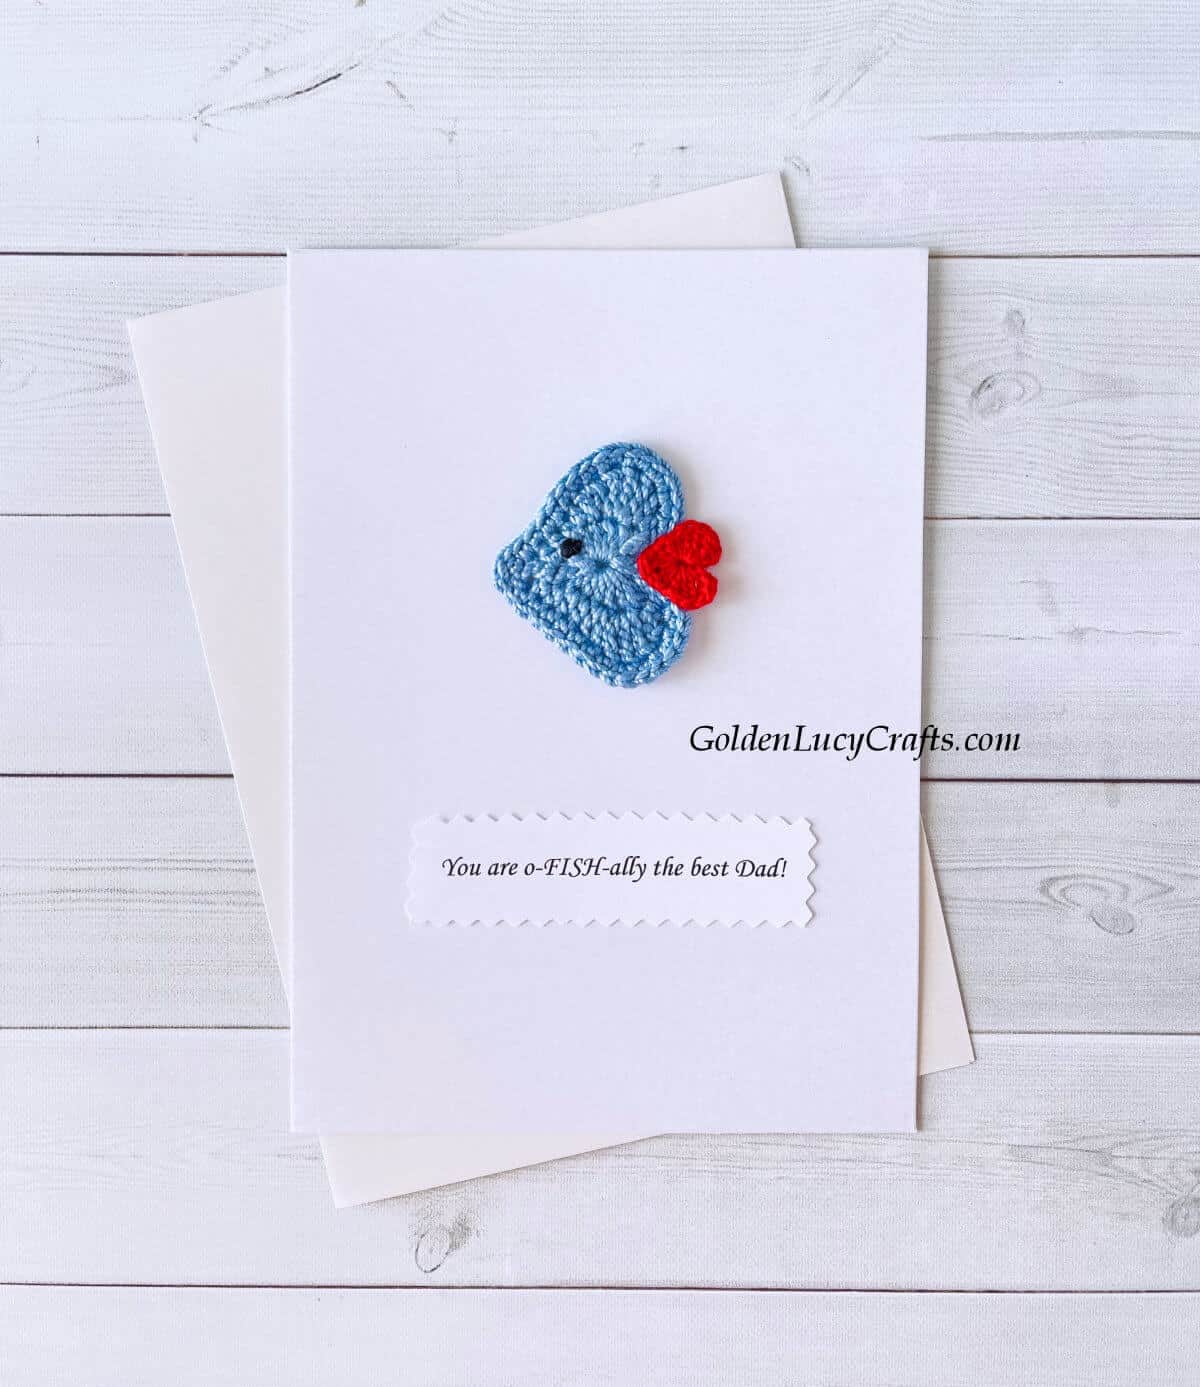 Crochet heart-shaped fish on a white card with the text "You are ofishally the best dad!"